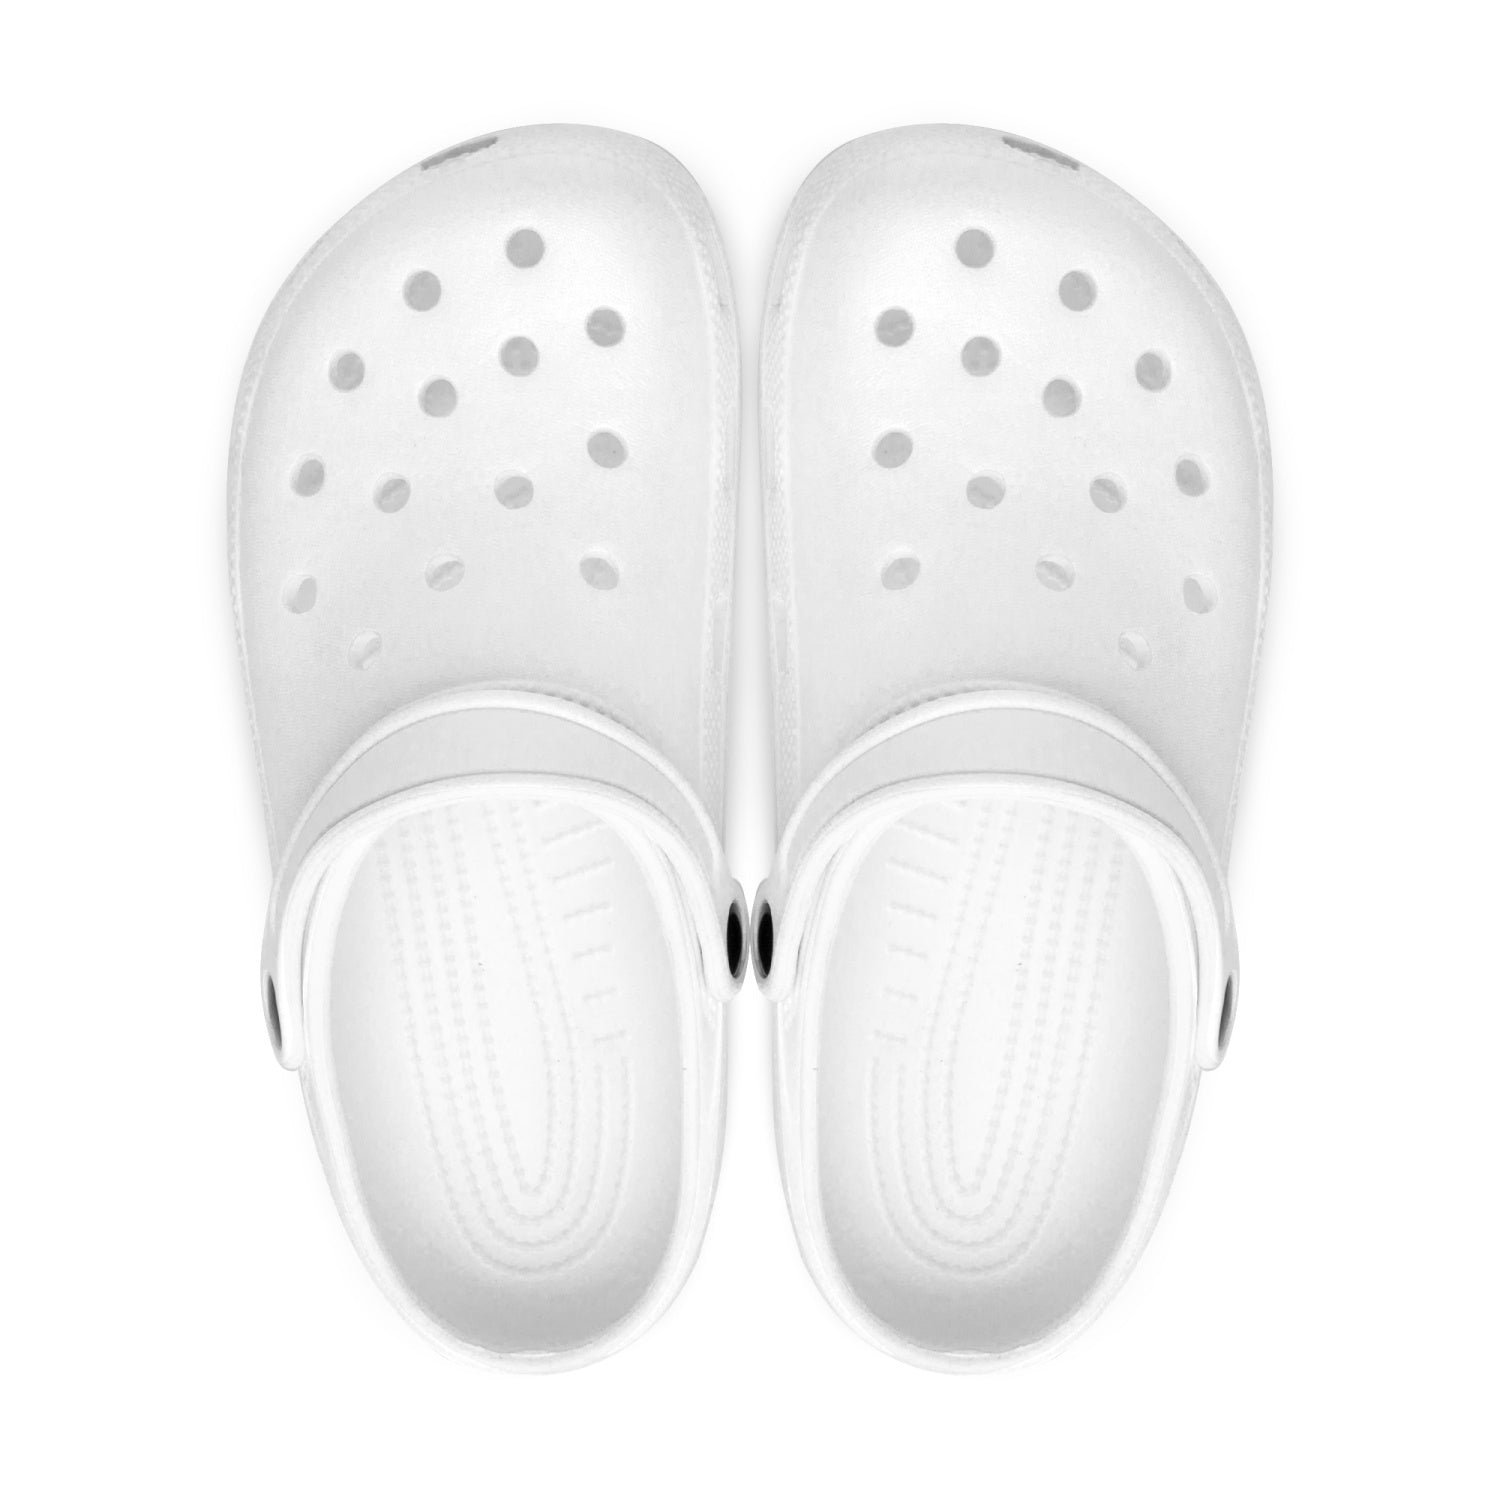 Bright White Color Unisex Clogs, Best Solid White Color Classic Solid Color Printed Adult's Lightweight Anti-Slip Unisex Extra Comfy Soft Breathable Supportive Clogs Flip Flop Pool Water Beach Slippers Sandals Shoes For Men or Women, Men's US Size: 3.5-12, Women's US Size: 4-12